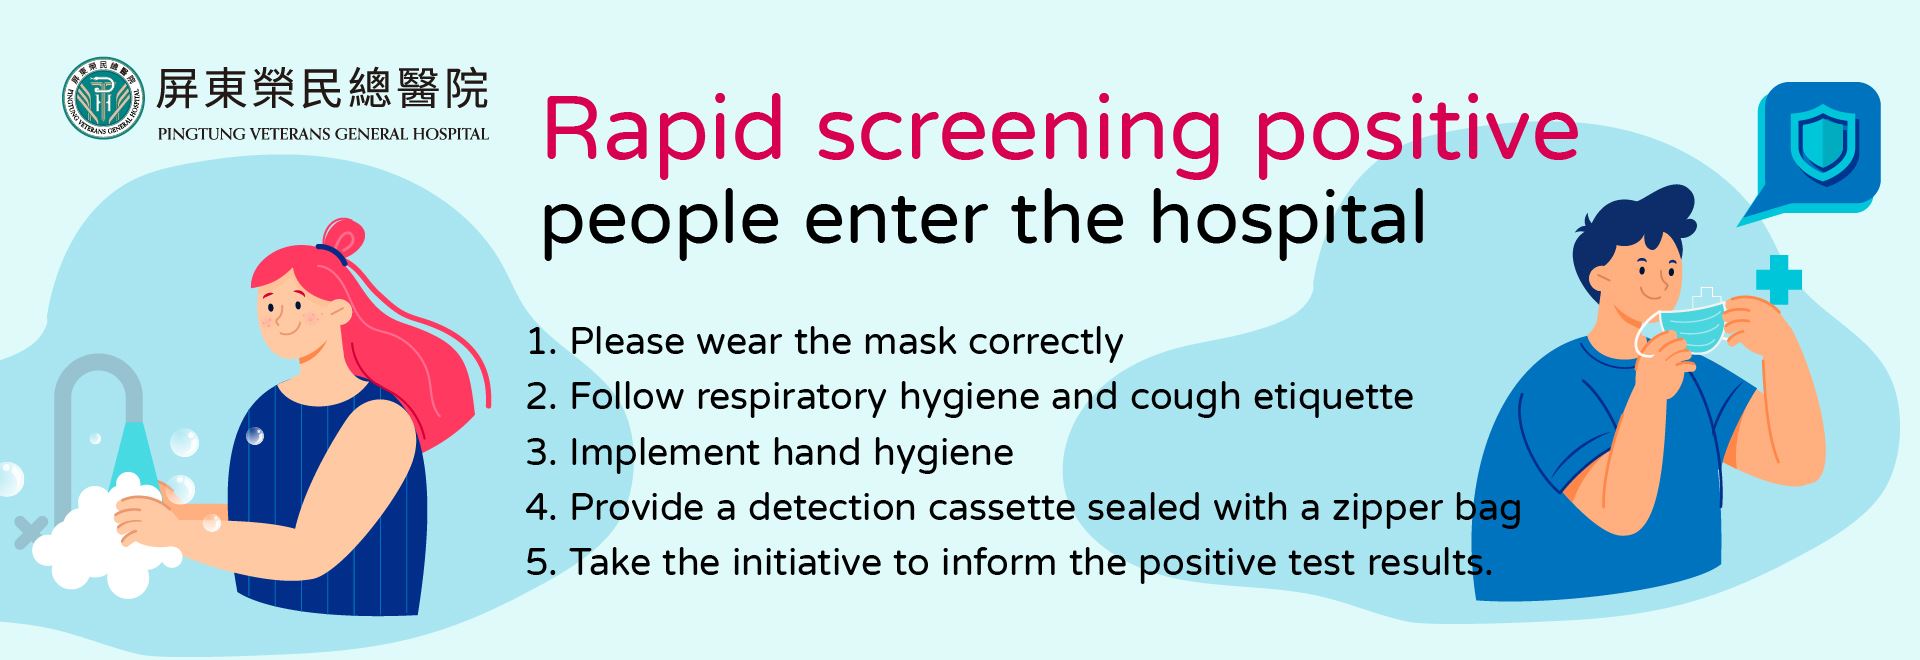 Rapid screening positive people enter the hospital(Image)